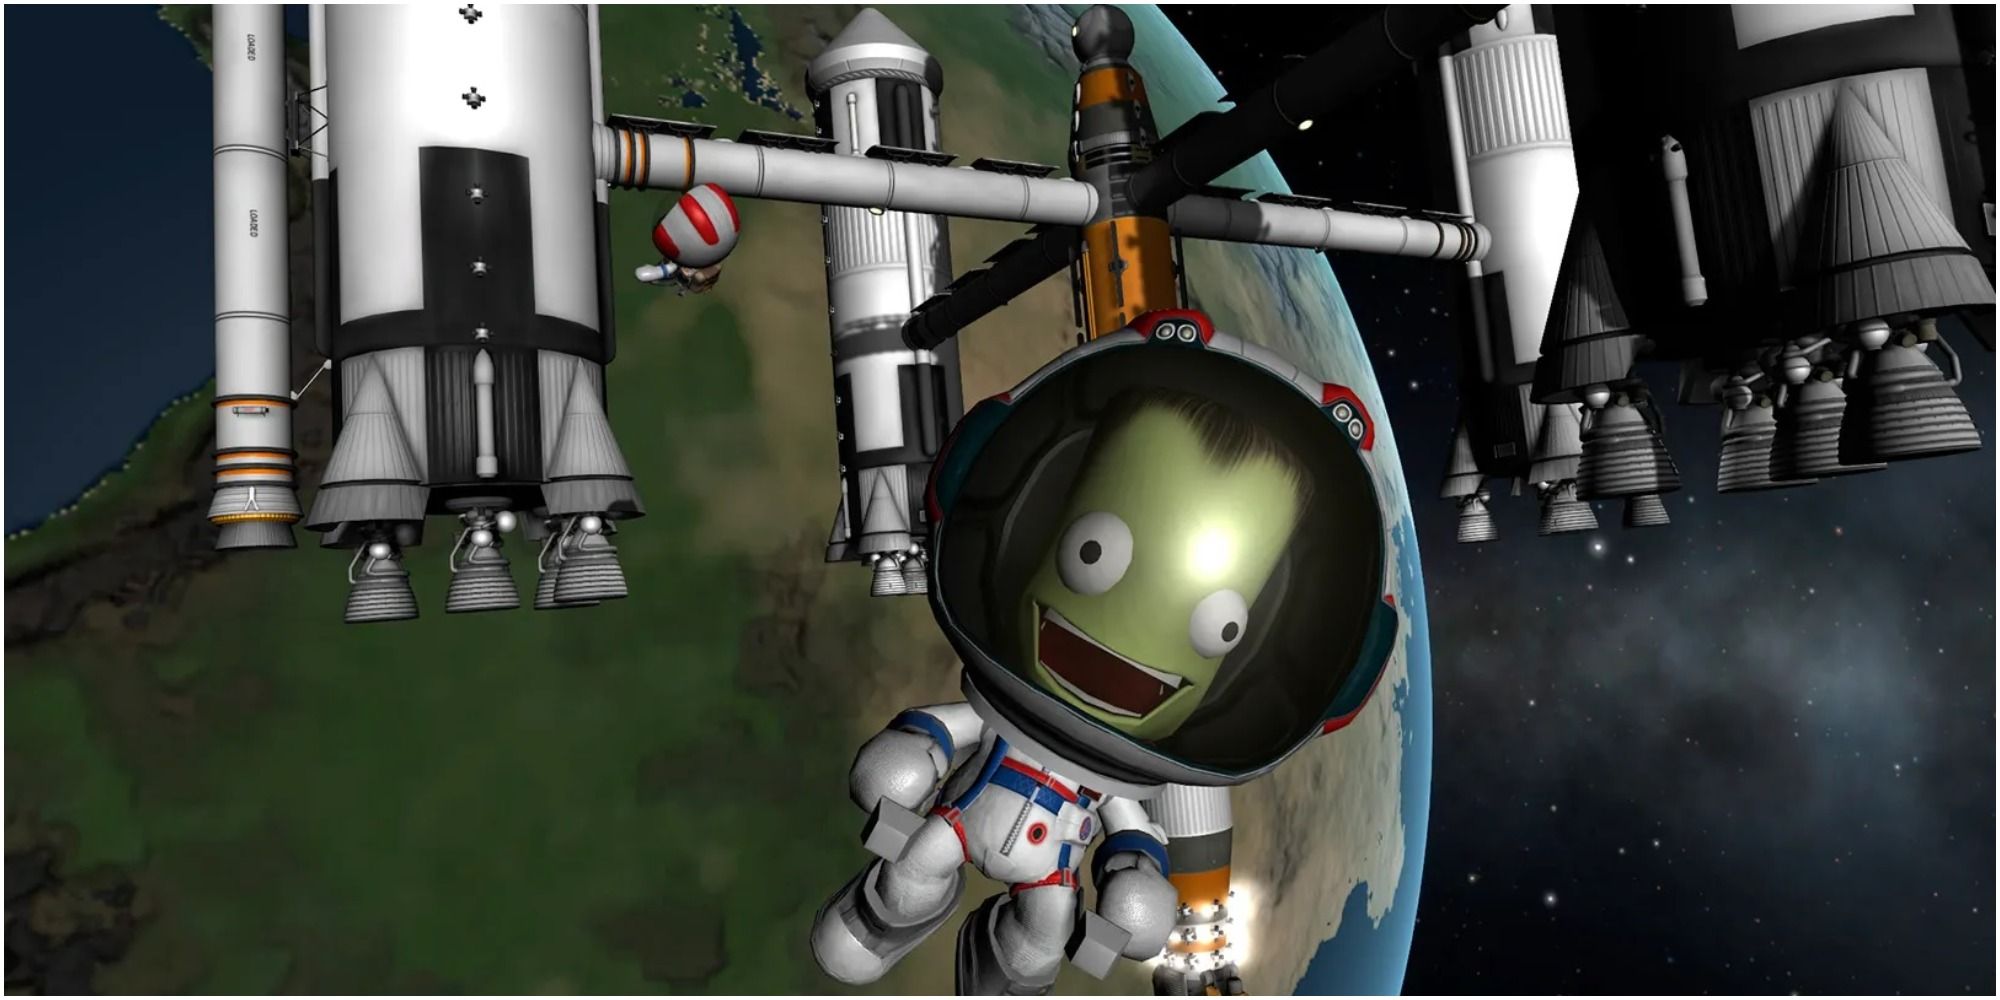 An excited Kerbal levitates from an orbiting spacecraft